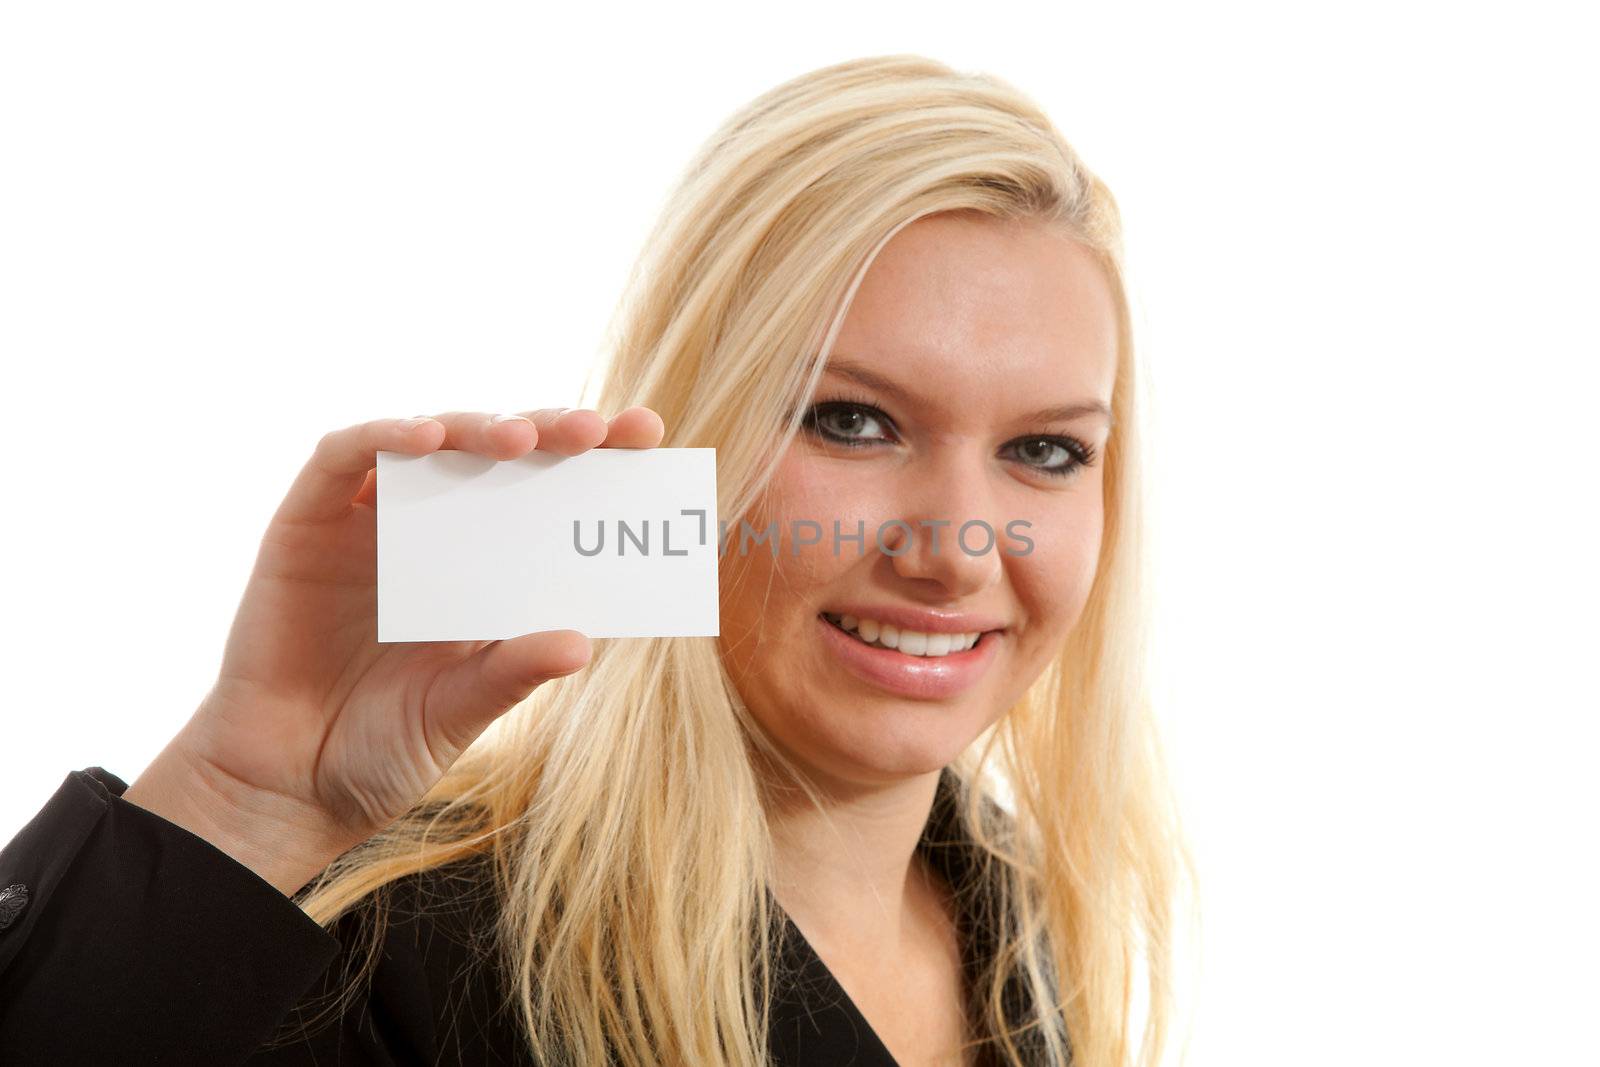 businesswoman is holding empty business card over white background, woman is blurred